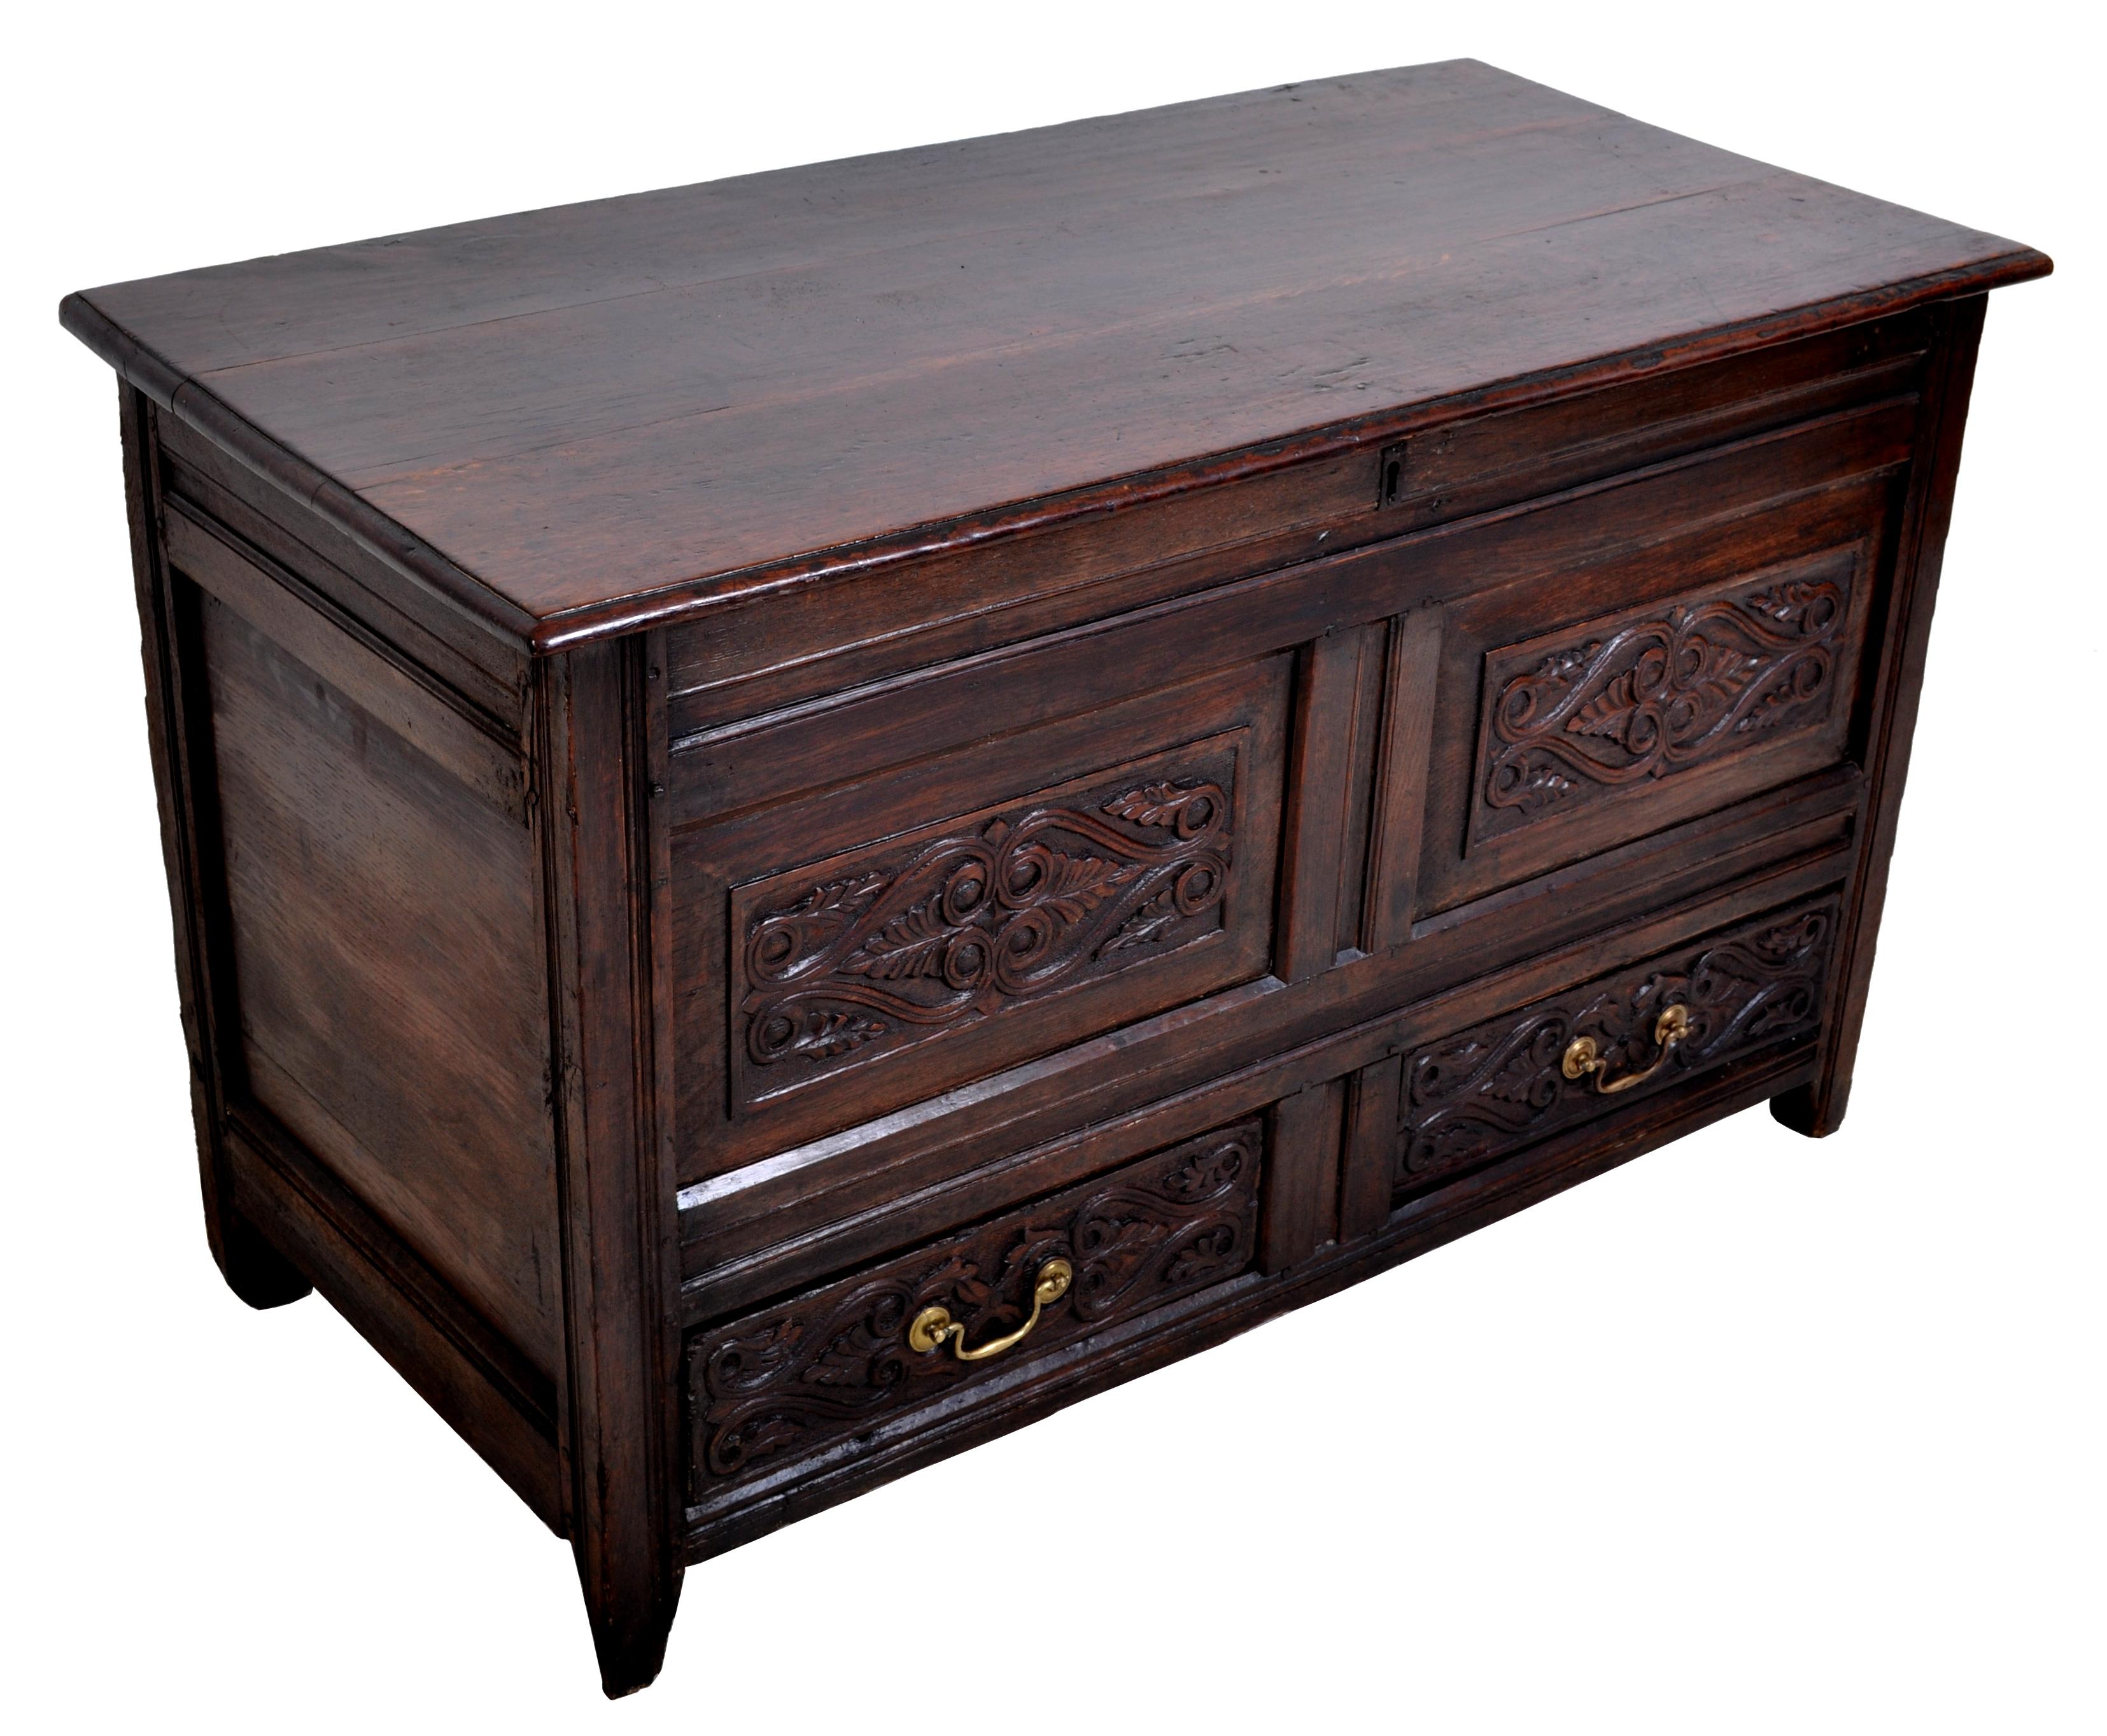 Hand-Carved Antique English Late 17th Century Carved Oak Mule Chest / Coffer, circa 1680